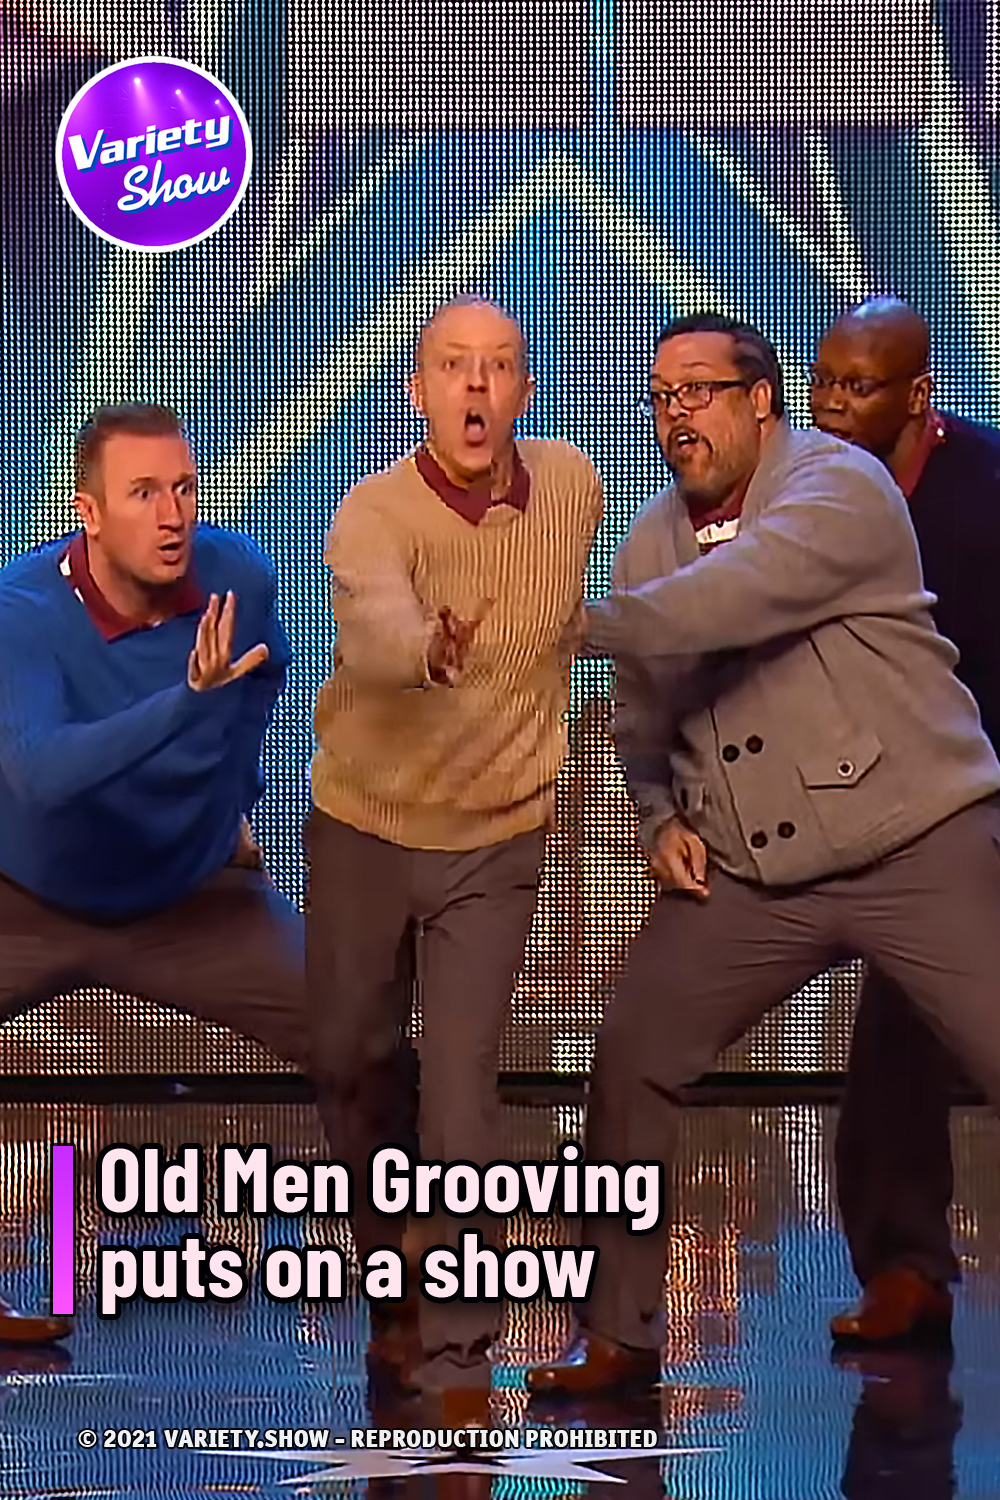 Old Men Grooving puts on a show